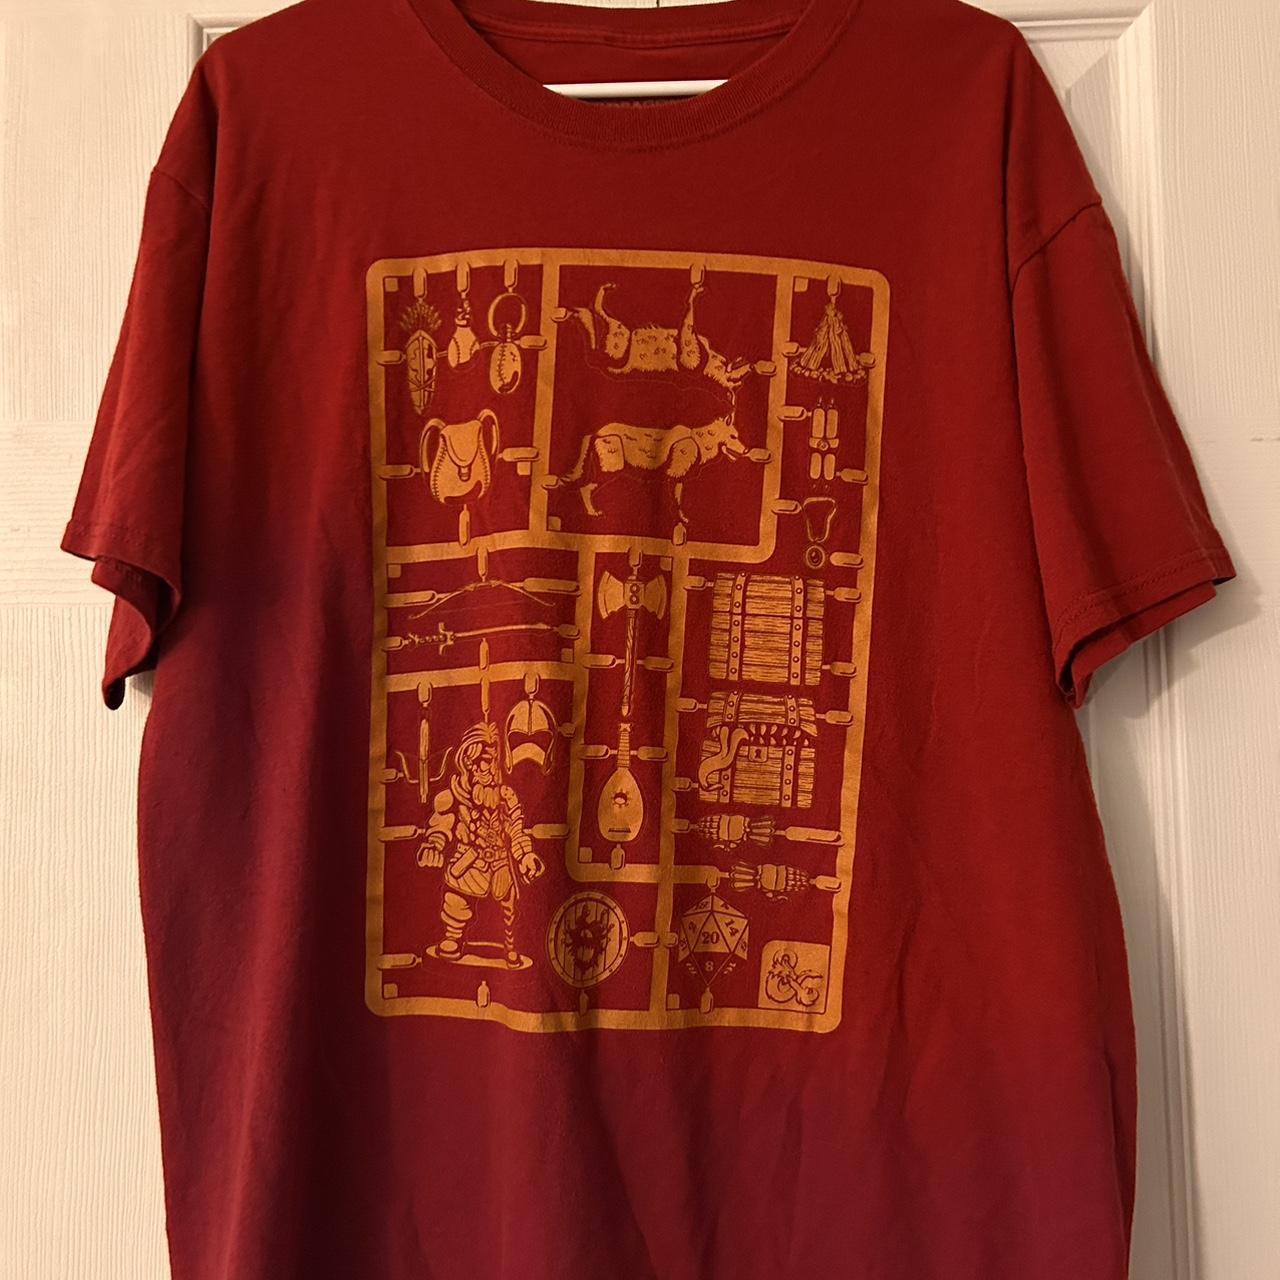 Men's Red and Gold T-shirt | Depop